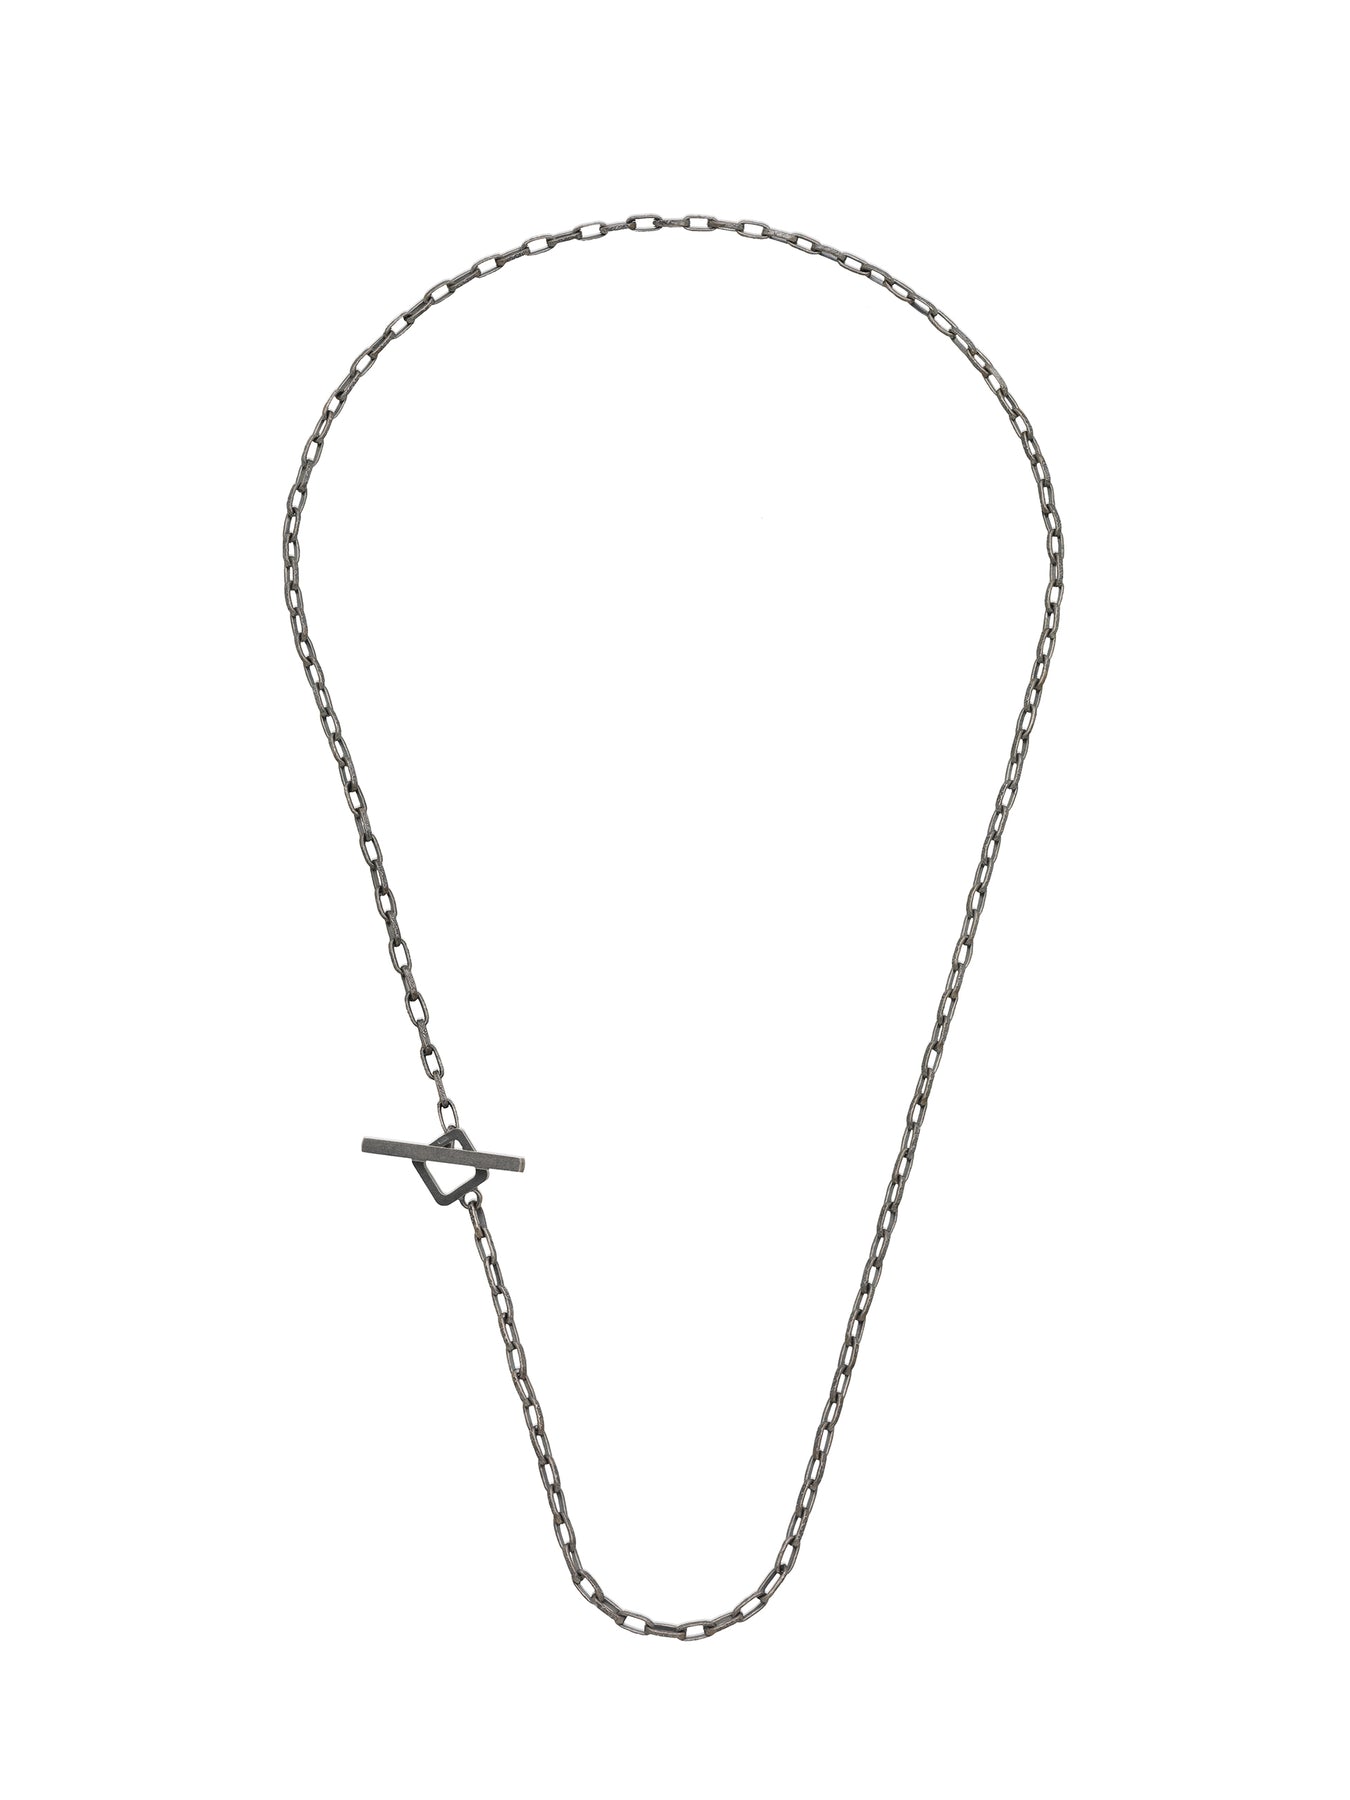 Ulysses Link Necklace with Toggle Clasp